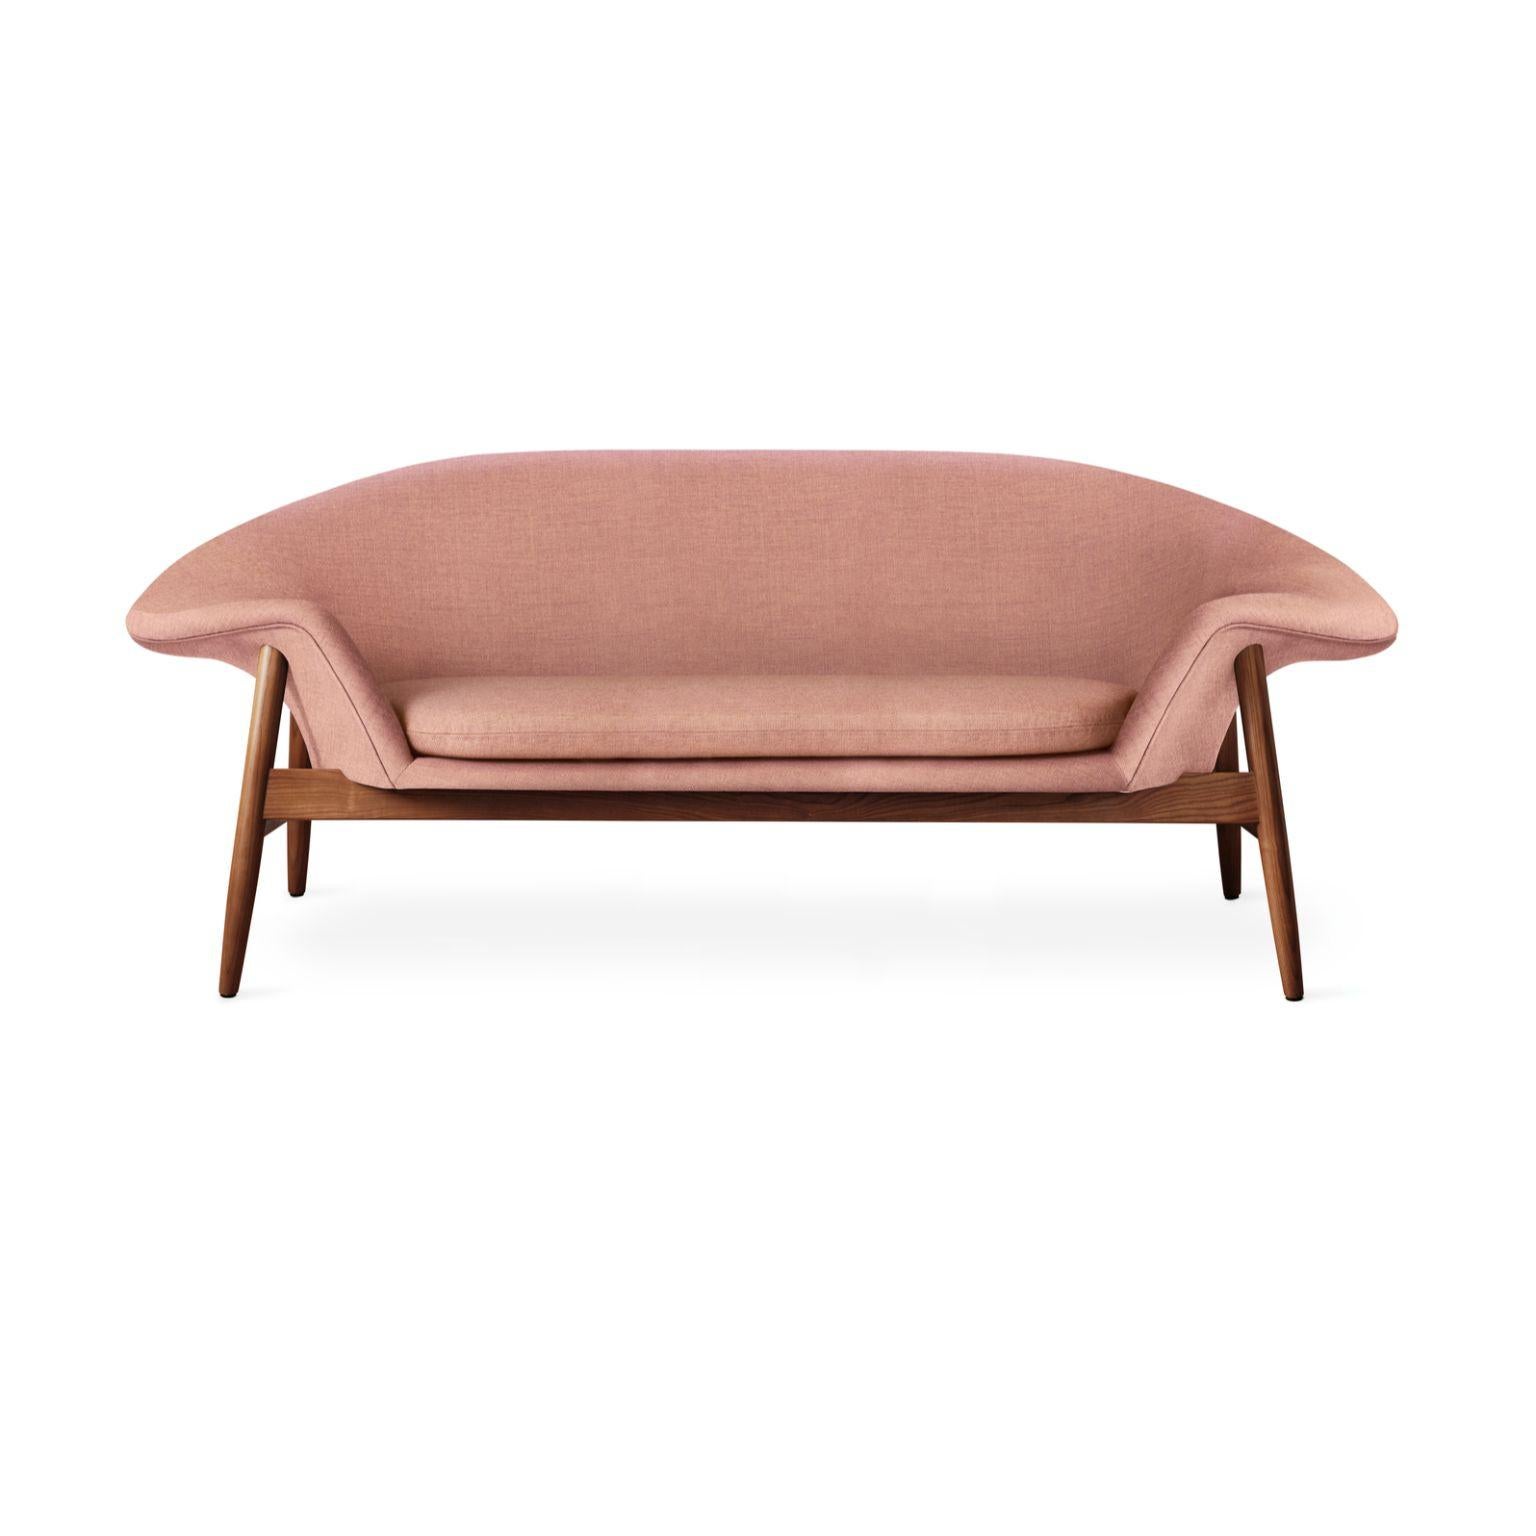 Fried Egg Sofa Pale Rose by Warm Nordic
Dimensions: D186 x W68 x H 68 cm
Material: Textile upholstery, Solid oiled teak
Weight: 42 kg
Also available in different colours and finishes. Please contact us.

Warm Nordic is an ambitious design